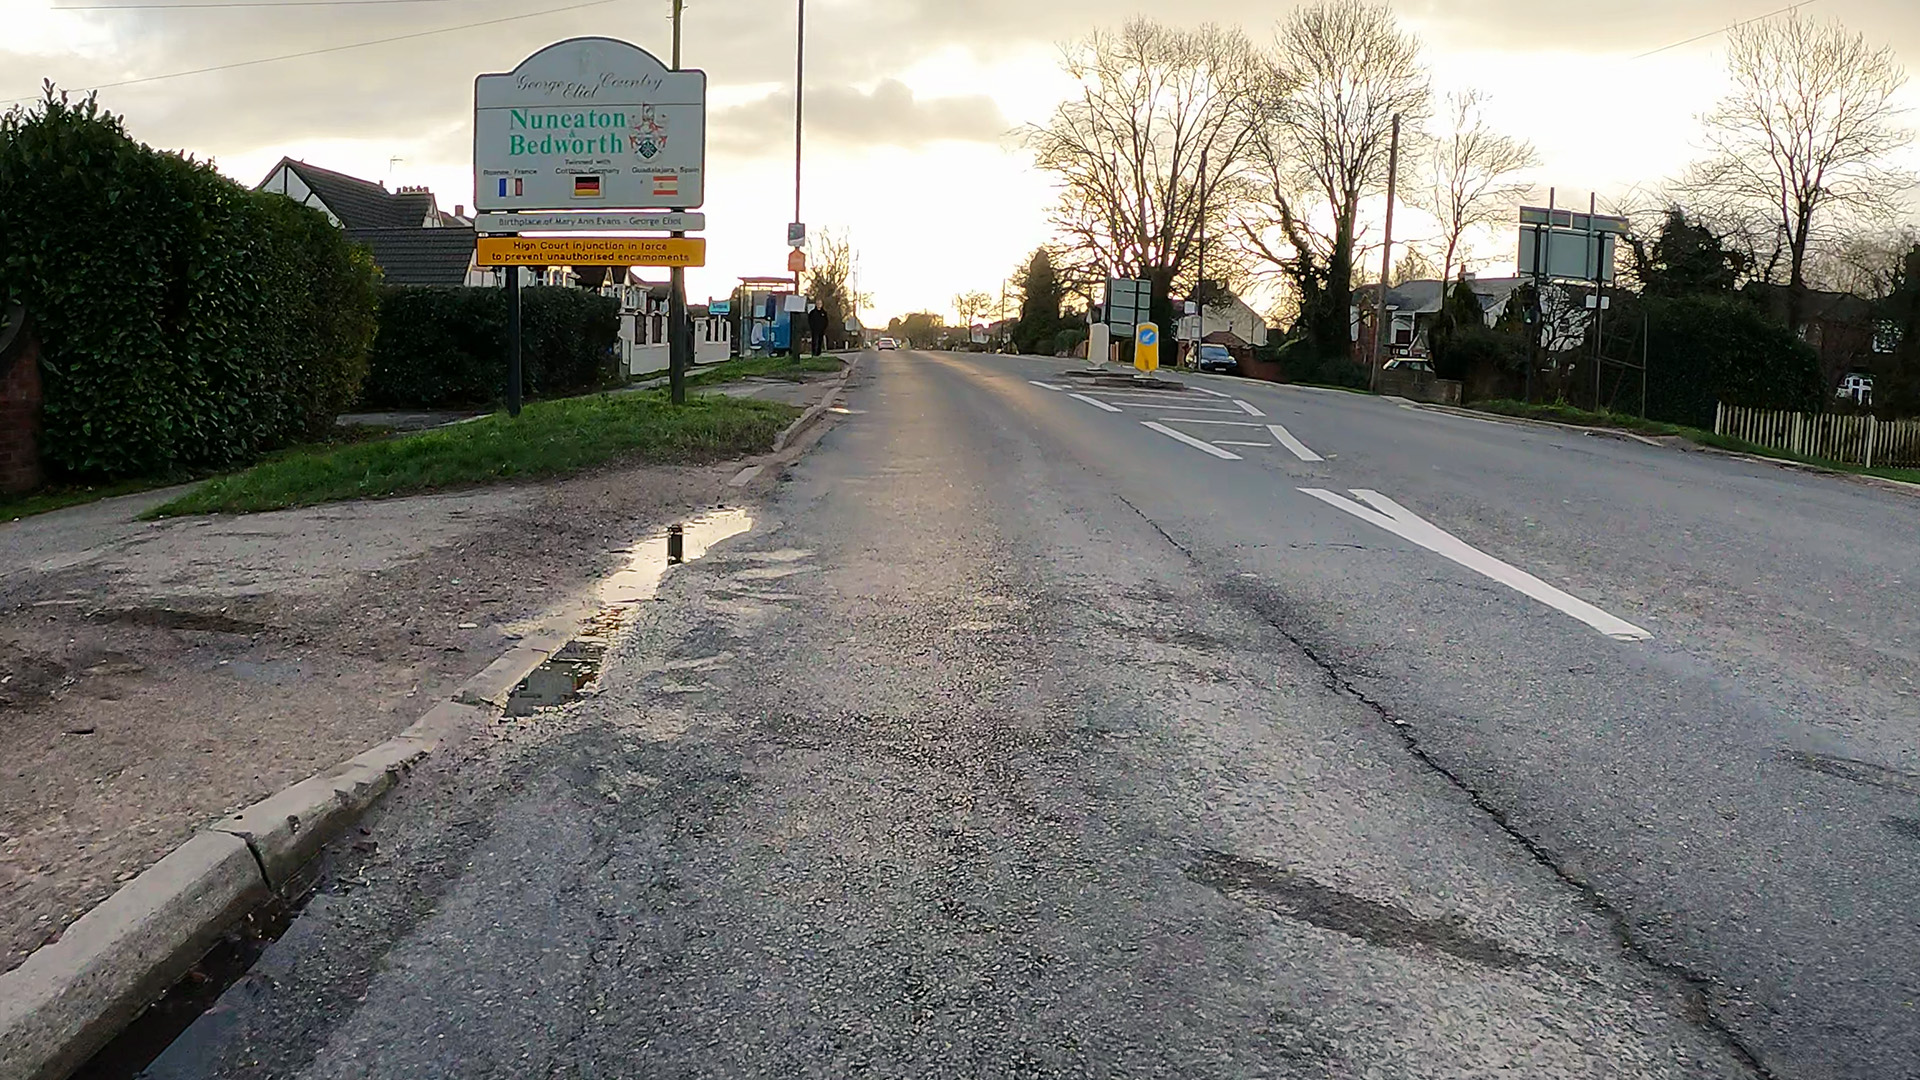 A47 Long Shoot, Nuneaton (West Bound). On the left is a town boundary sign. A pedestrian island is visible in the middle of the road, presenting as a pinch point.